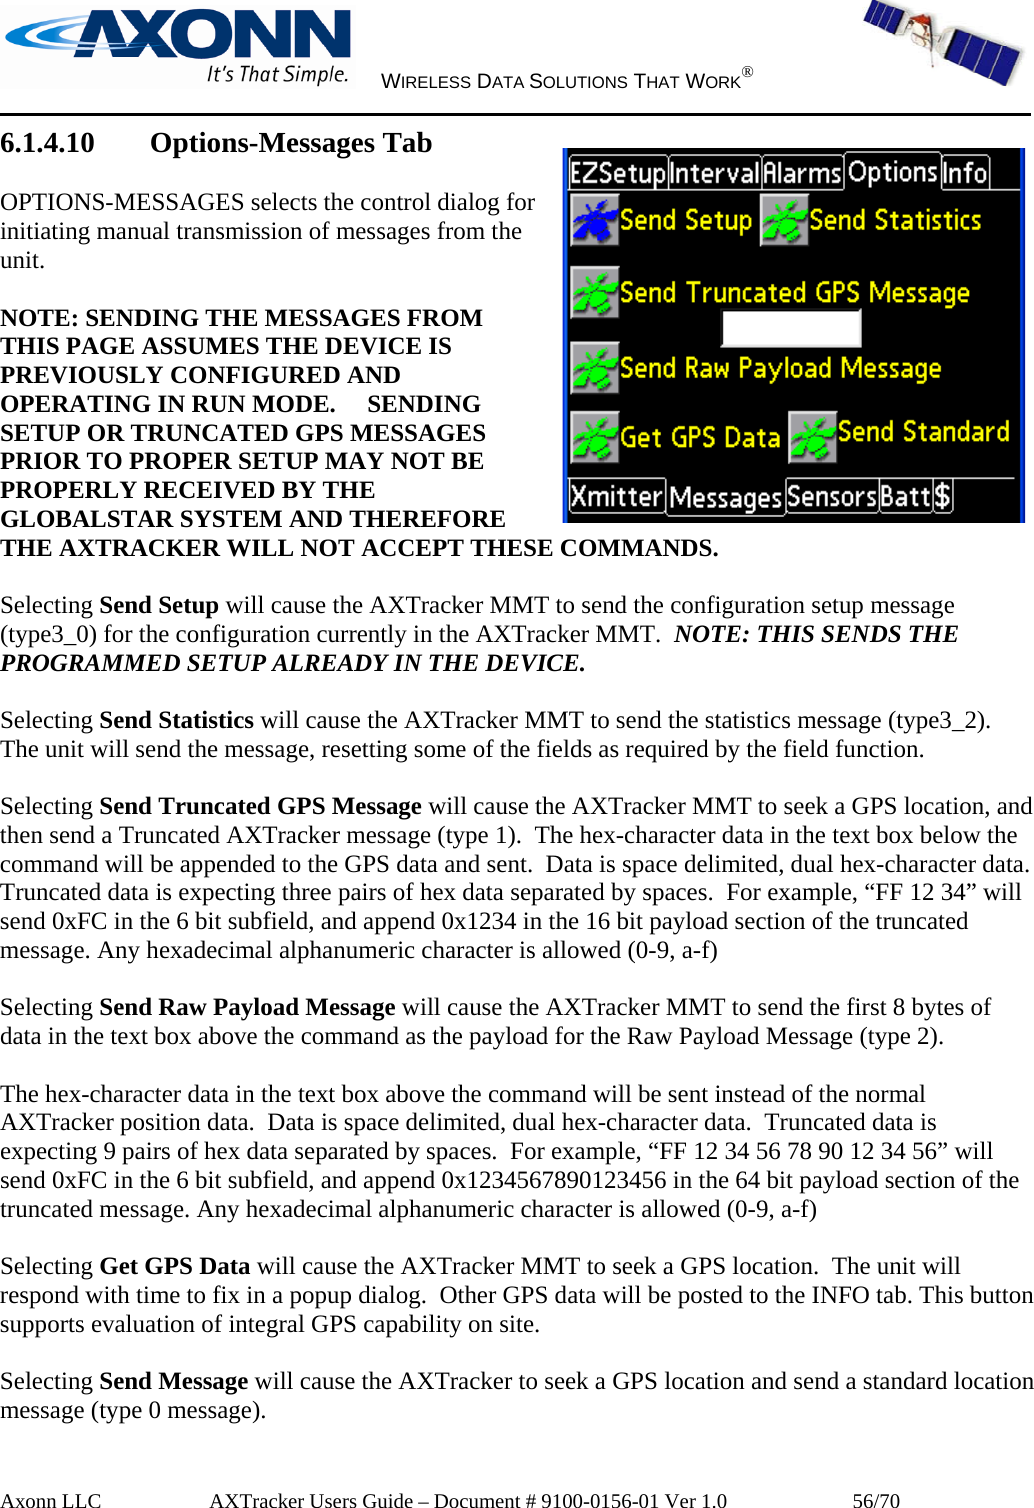     WIRELESS DATA SOLUTIONS THAT WORK®   Axonn LLC         AXTracker Users Guide – Document # 9100-0156-01 Ver 1.0                  56/70 6.1.4.10 Options-Messages Tab  OPTIONS-MESSAGES selects the control dialog for initiating manual transmission of messages from the unit.   NOTE: SENDING THE MESSAGES FROM THIS PAGE ASSUMES THE DEVICE IS PREVIOUSLY CONFIGURED AND OPERATING IN RUN MODE.     SENDING SETUP OR TRUNCATED GPS MESSAGES PRIOR TO PROPER SETUP MAY NOT BE PROPERLY RECEIVED BY THE GLOBALSTAR SYSTEM AND THEREFORE THE AXTRACKER WILL NOT ACCEPT THESE COMMANDS.  Selecting Send Setup will cause the AXTracker MMT to send the configuration setup message (type3_0) for the configuration currently in the AXTracker MMT.  NOTE: THIS SENDS THE PROGRAMMED SETUP ALREADY IN THE DEVICE.    Selecting Send Statistics will cause the AXTracker MMT to send the statistics message (type3_2).  The unit will send the message, resetting some of the fields as required by the field function.  Selecting Send Truncated GPS Message will cause the AXTracker MMT to seek a GPS location, and then send a Truncated AXTracker message (type 1).  The hex-character data in the text box below the command will be appended to the GPS data and sent.  Data is space delimited, dual hex-character data.  Truncated data is expecting three pairs of hex data separated by spaces.  For example, “FF 12 34” will send 0xFC in the 6 bit subfield, and append 0x1234 in the 16 bit payload section of the truncated message. Any hexadecimal alphanumeric character is allowed (0-9, a-f)  Selecting Send Raw Payload Message will cause the AXTracker MMT to send the first 8 bytes of data in the text box above the command as the payload for the Raw Payload Message (type 2).    The hex-character data in the text box above the command will be sent instead of the normal AXTracker position data.  Data is space delimited, dual hex-character data.  Truncated data is expecting 9 pairs of hex data separated by spaces.  For example, “FF 12 34 56 78 90 12 34 56” will send 0xFC in the 6 bit subfield, and append 0x1234567890123456 in the 64 bit payload section of the truncated message. Any hexadecimal alphanumeric character is allowed (0-9, a-f)  Selecting Get GPS Data will cause the AXTracker MMT to seek a GPS location.  The unit will respond with time to fix in a popup dialog.  Other GPS data will be posted to the INFO tab. This button supports evaluation of integral GPS capability on site.   Selecting Send Message will cause the AXTracker to seek a GPS location and send a standard location message (type 0 message).  